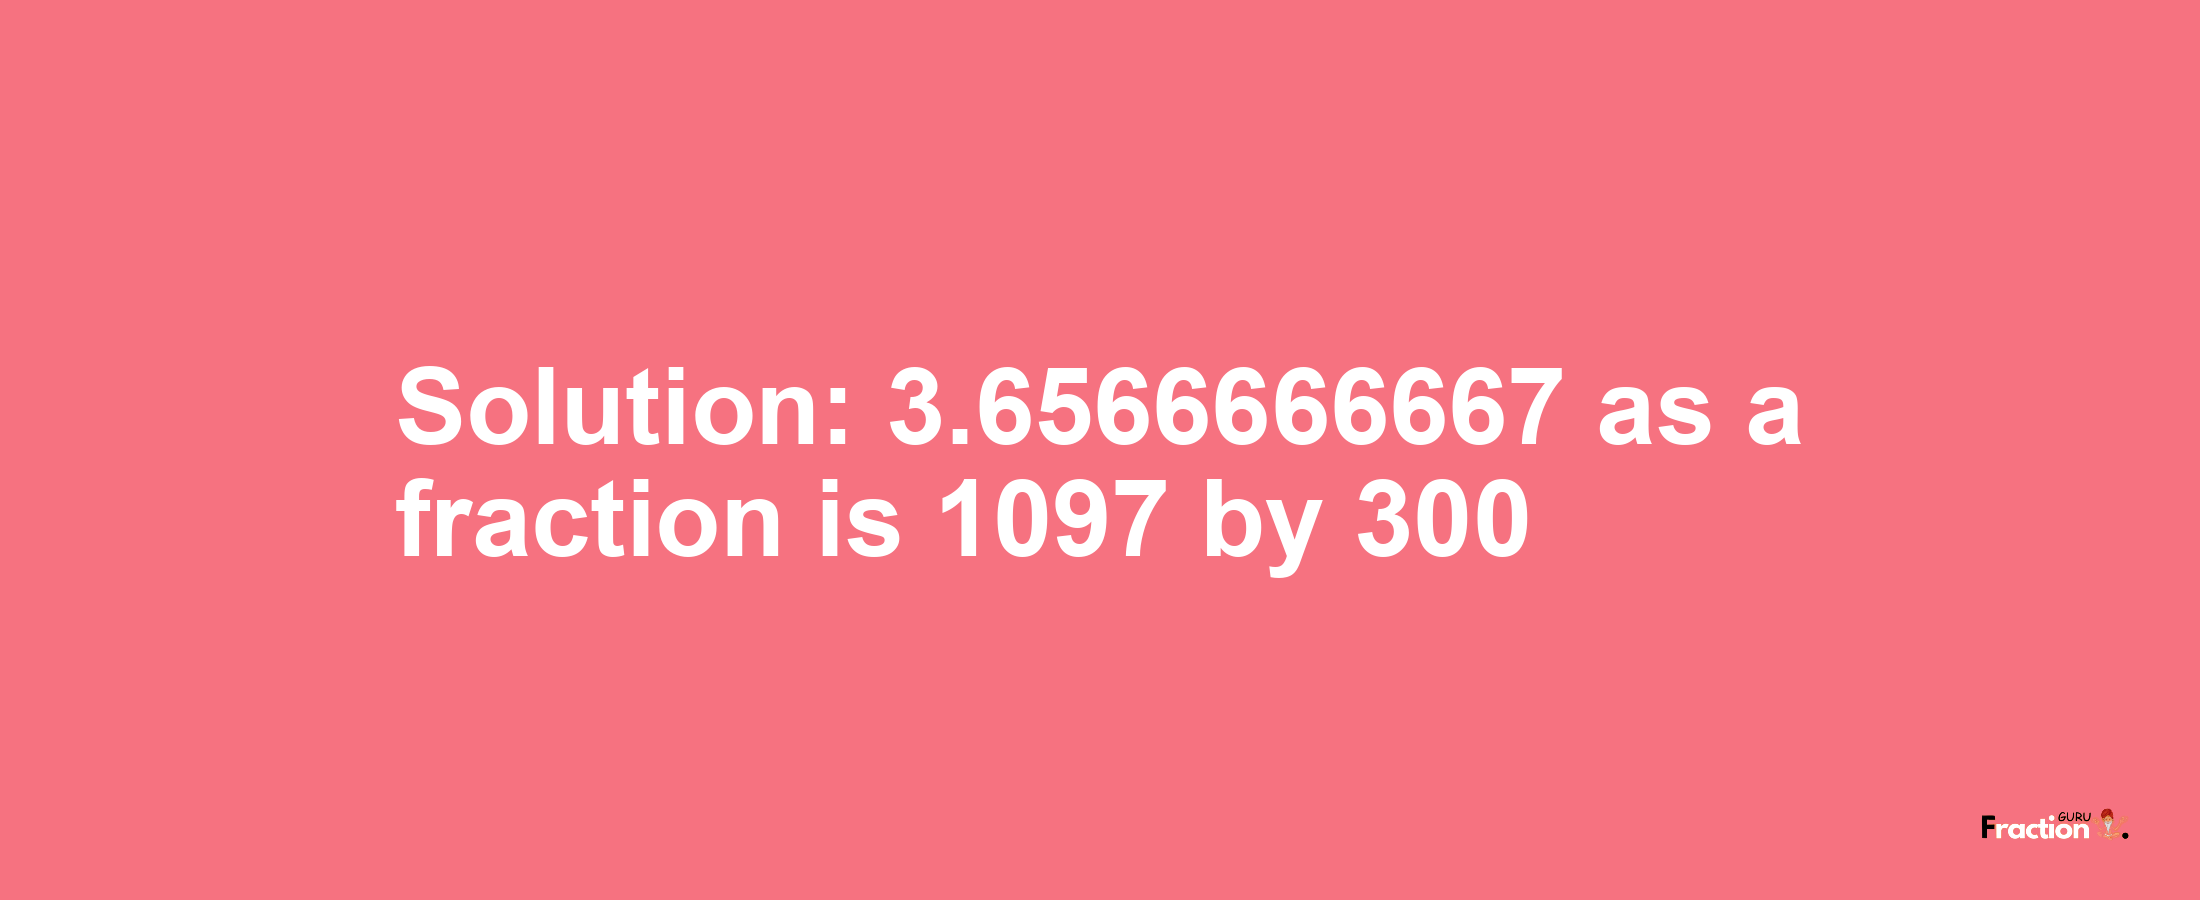 Solution:3.6566666667 as a fraction is 1097/300